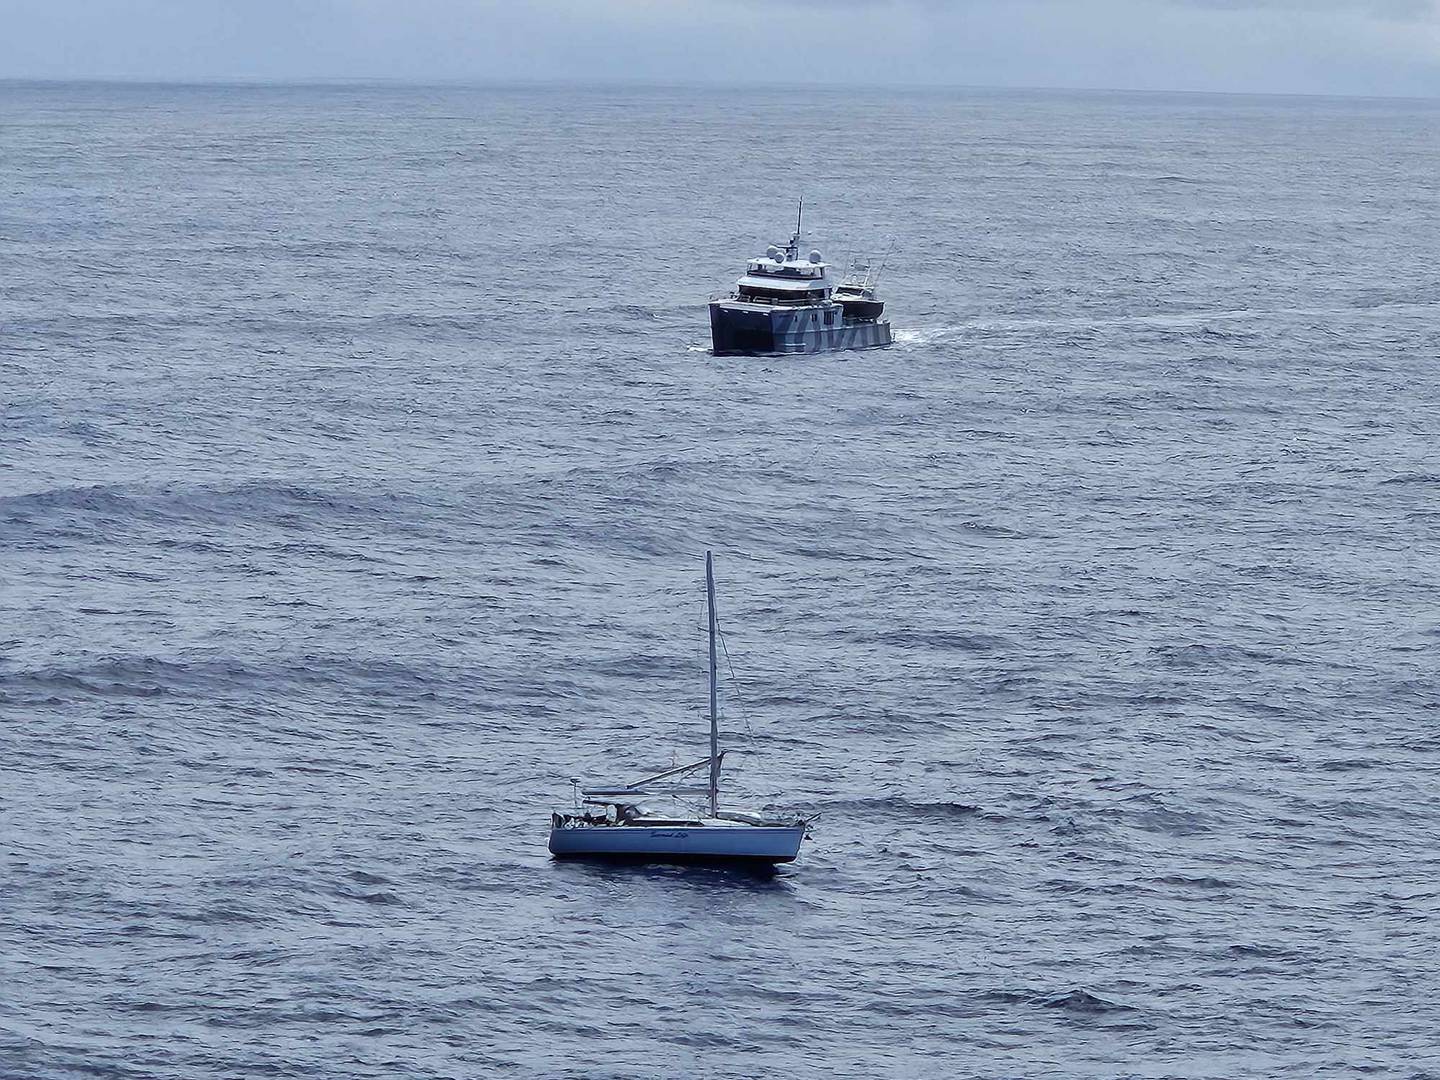 Sir Michael Hill's private yacht The Beast was the second ship on the scene to assist the yacht in distress. Photo / Ali Gilchrist